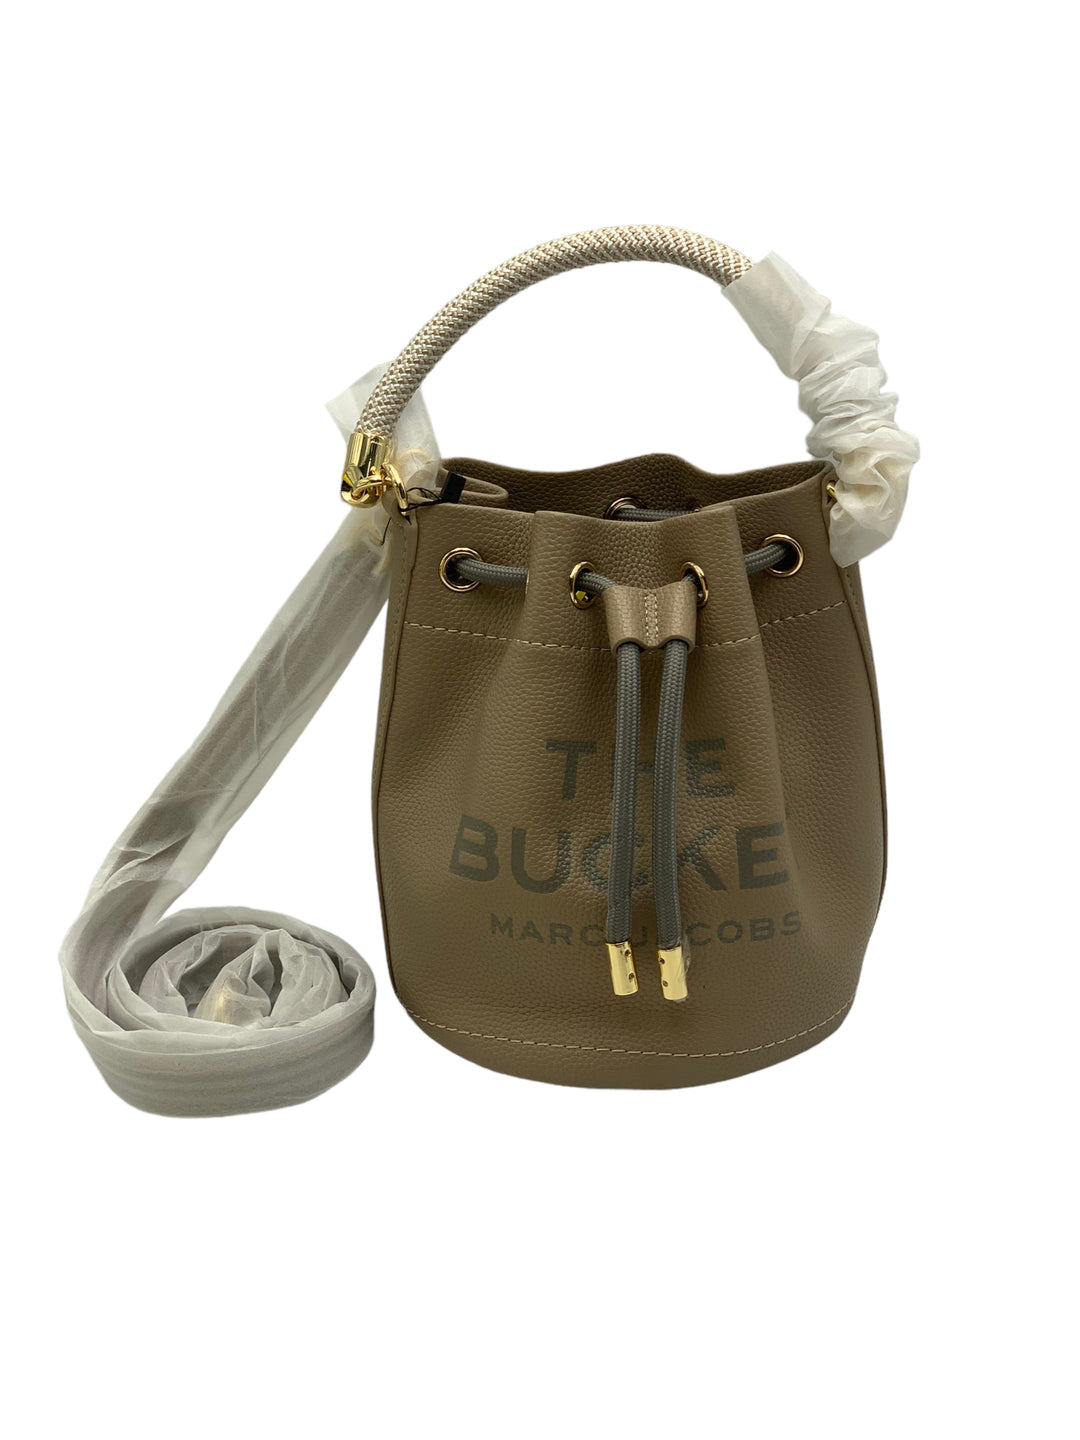 Marc Jacobs The Bucket Bag - Cement